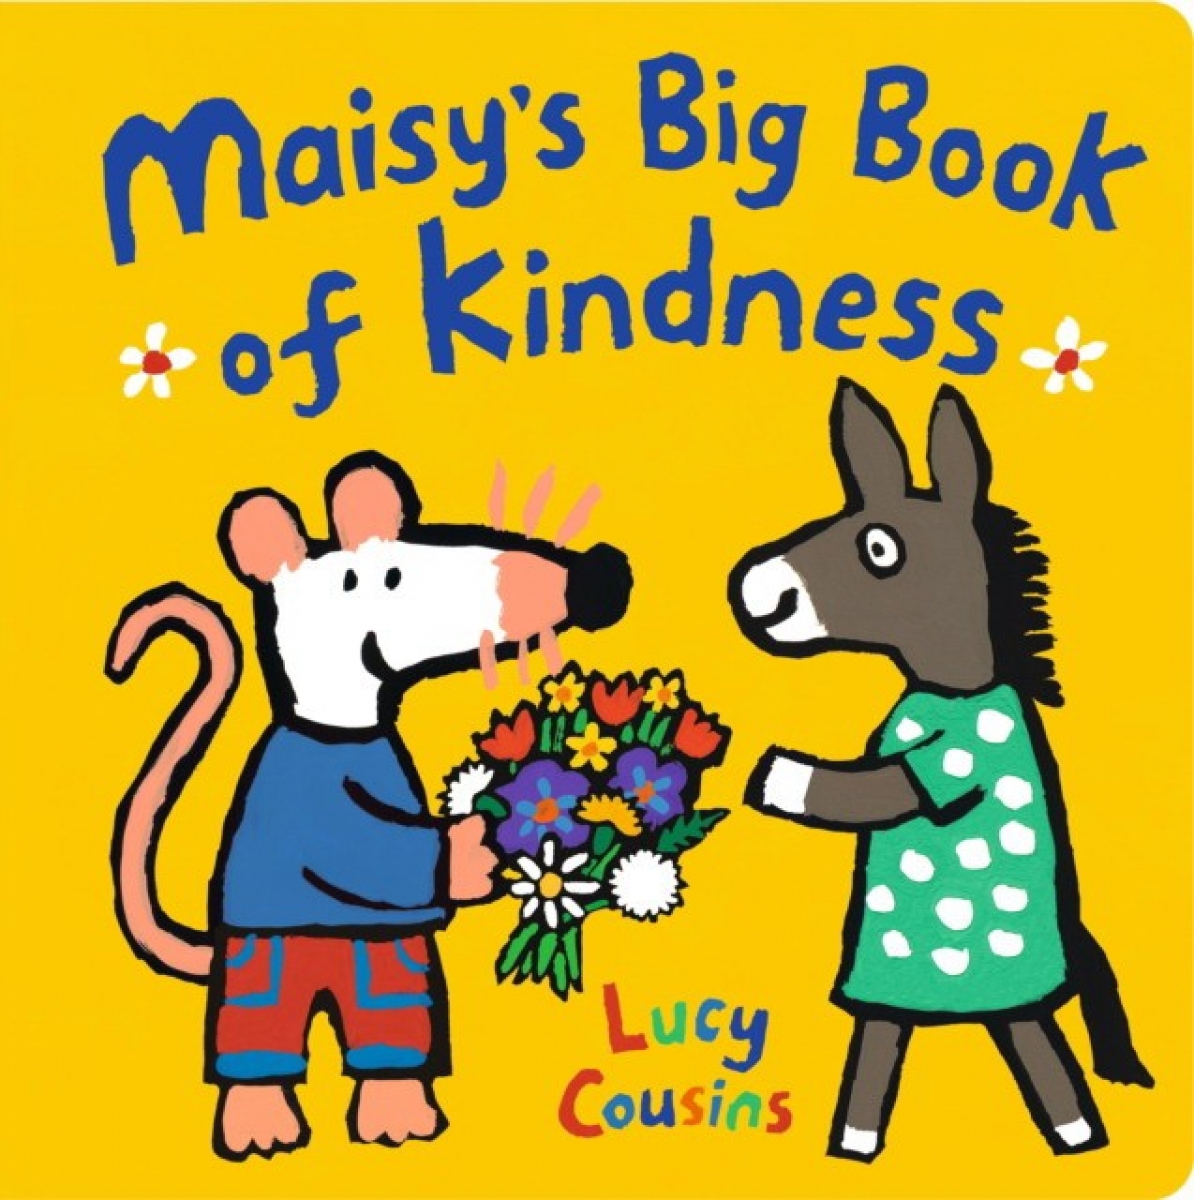 Cousins Lucy Maisy`s big book of kindness 